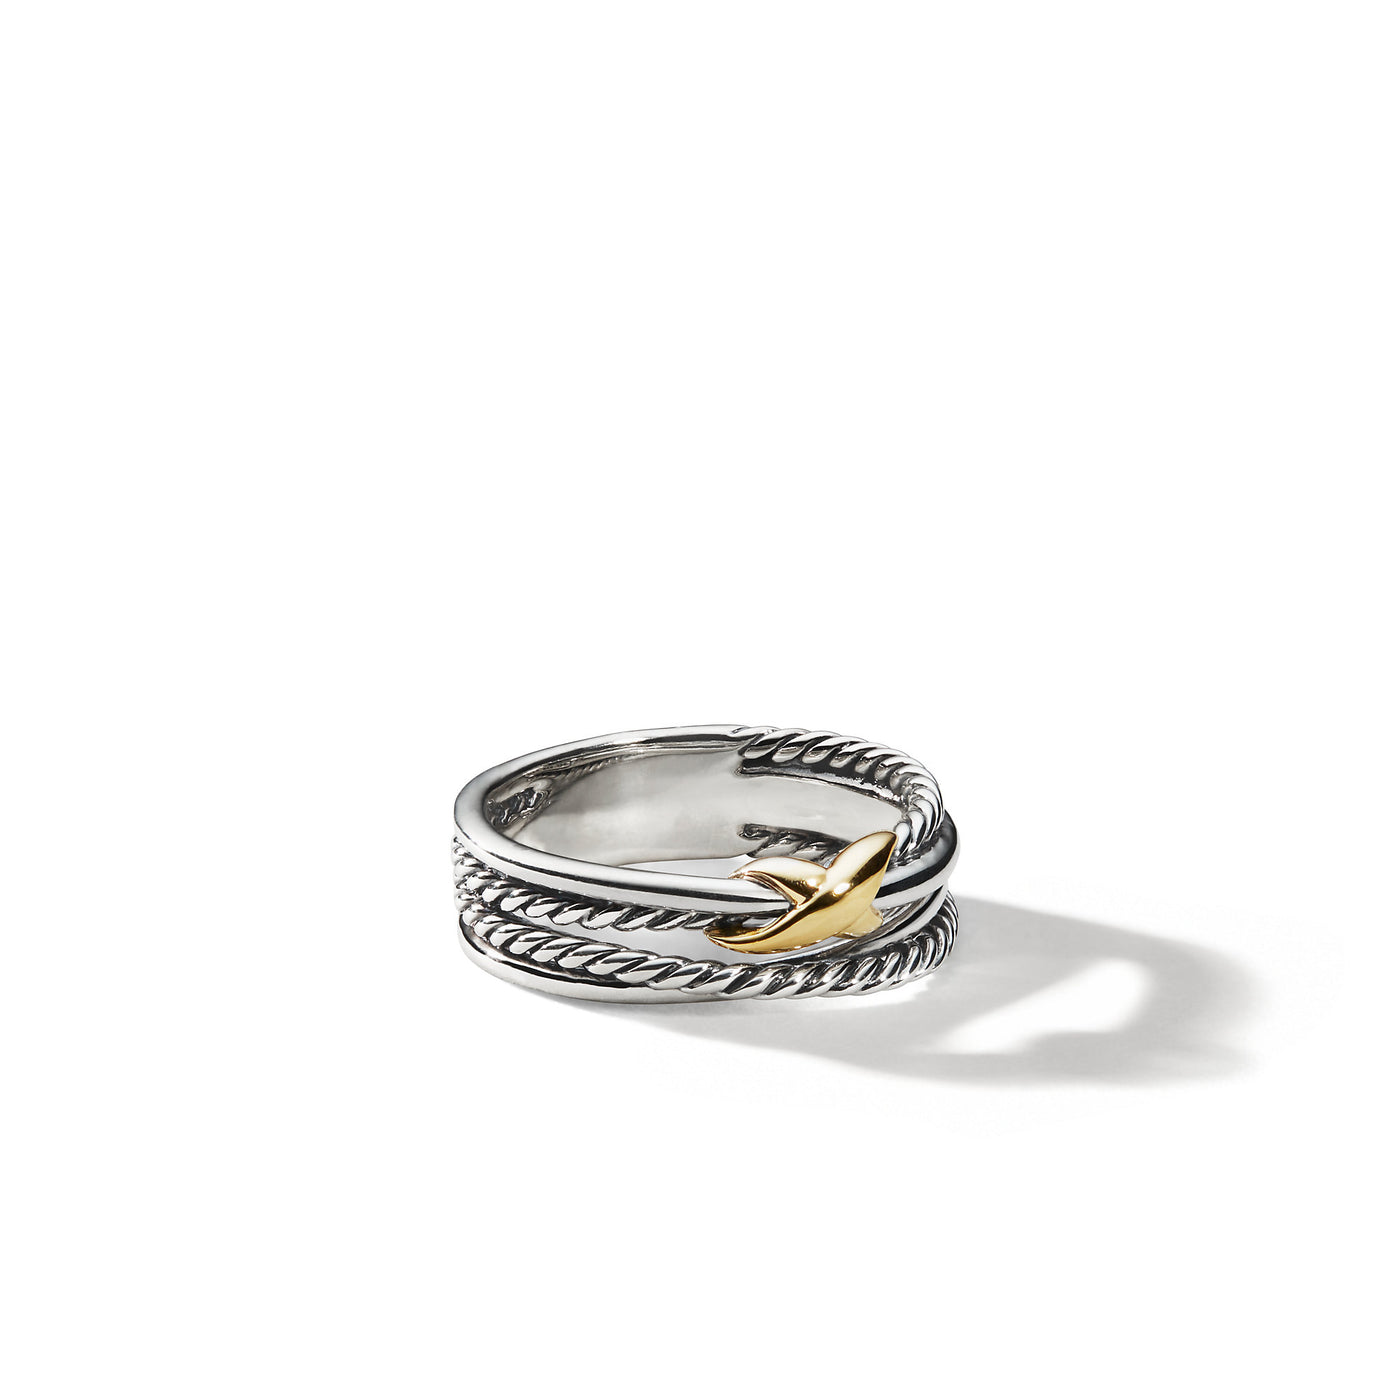 X Crossover Band Ring in Sterling Silver with 18K Yellow Gold\, 6mm